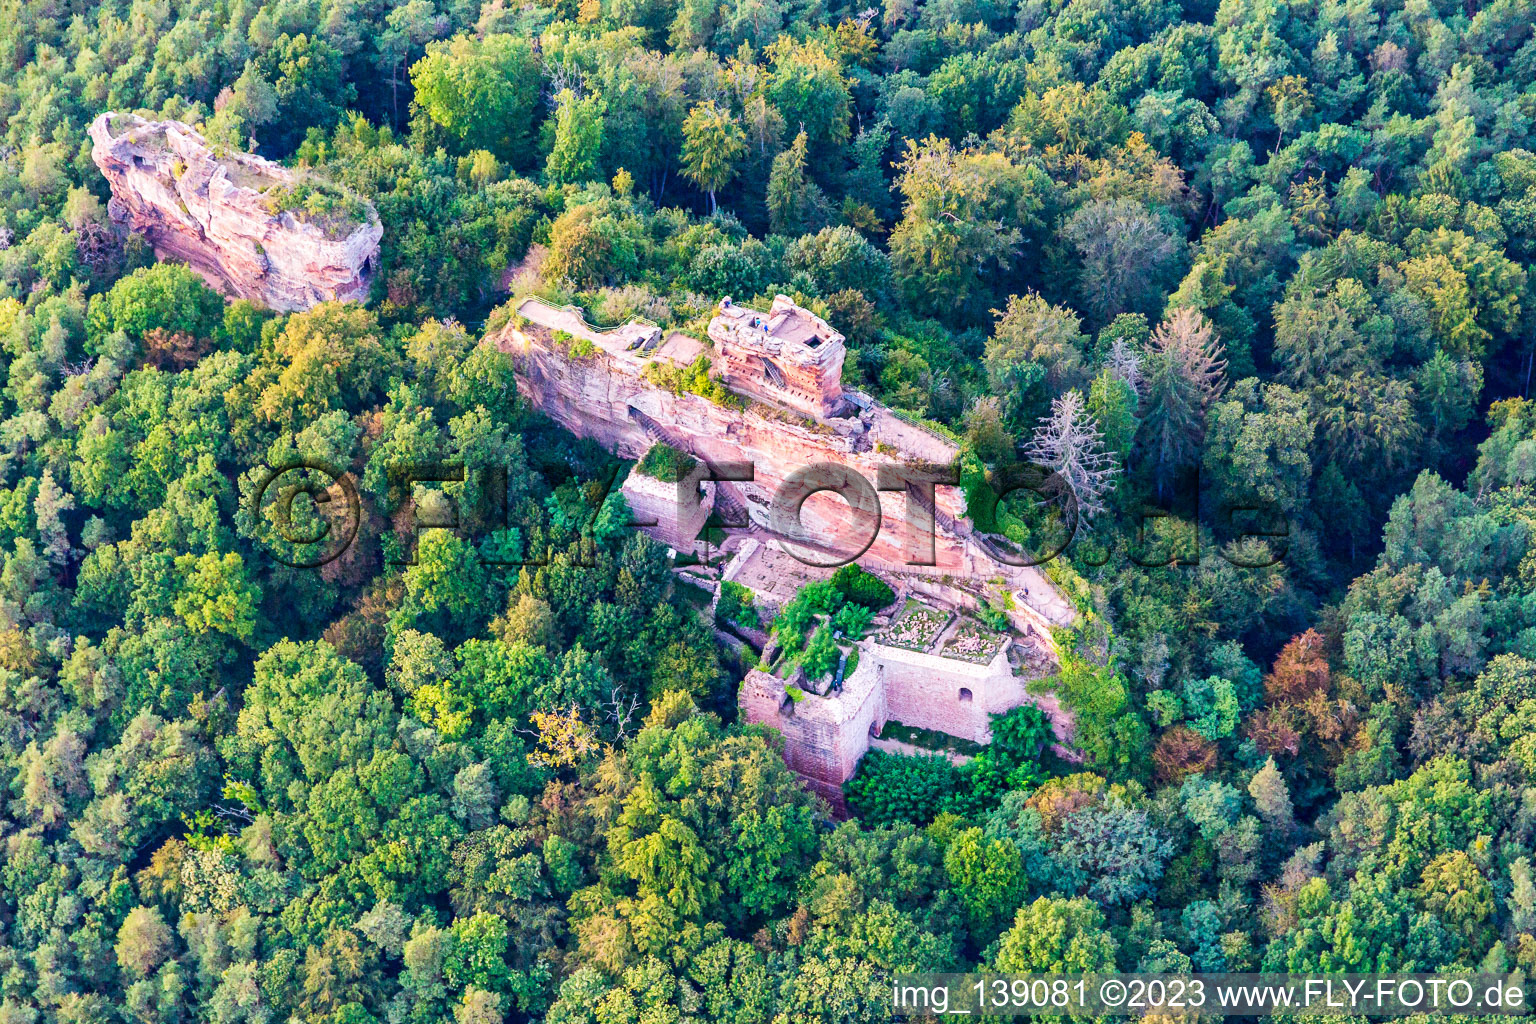 Bird's eye view of Drachenfels Castle in Busenberg in the state Rhineland-Palatinate, Germany